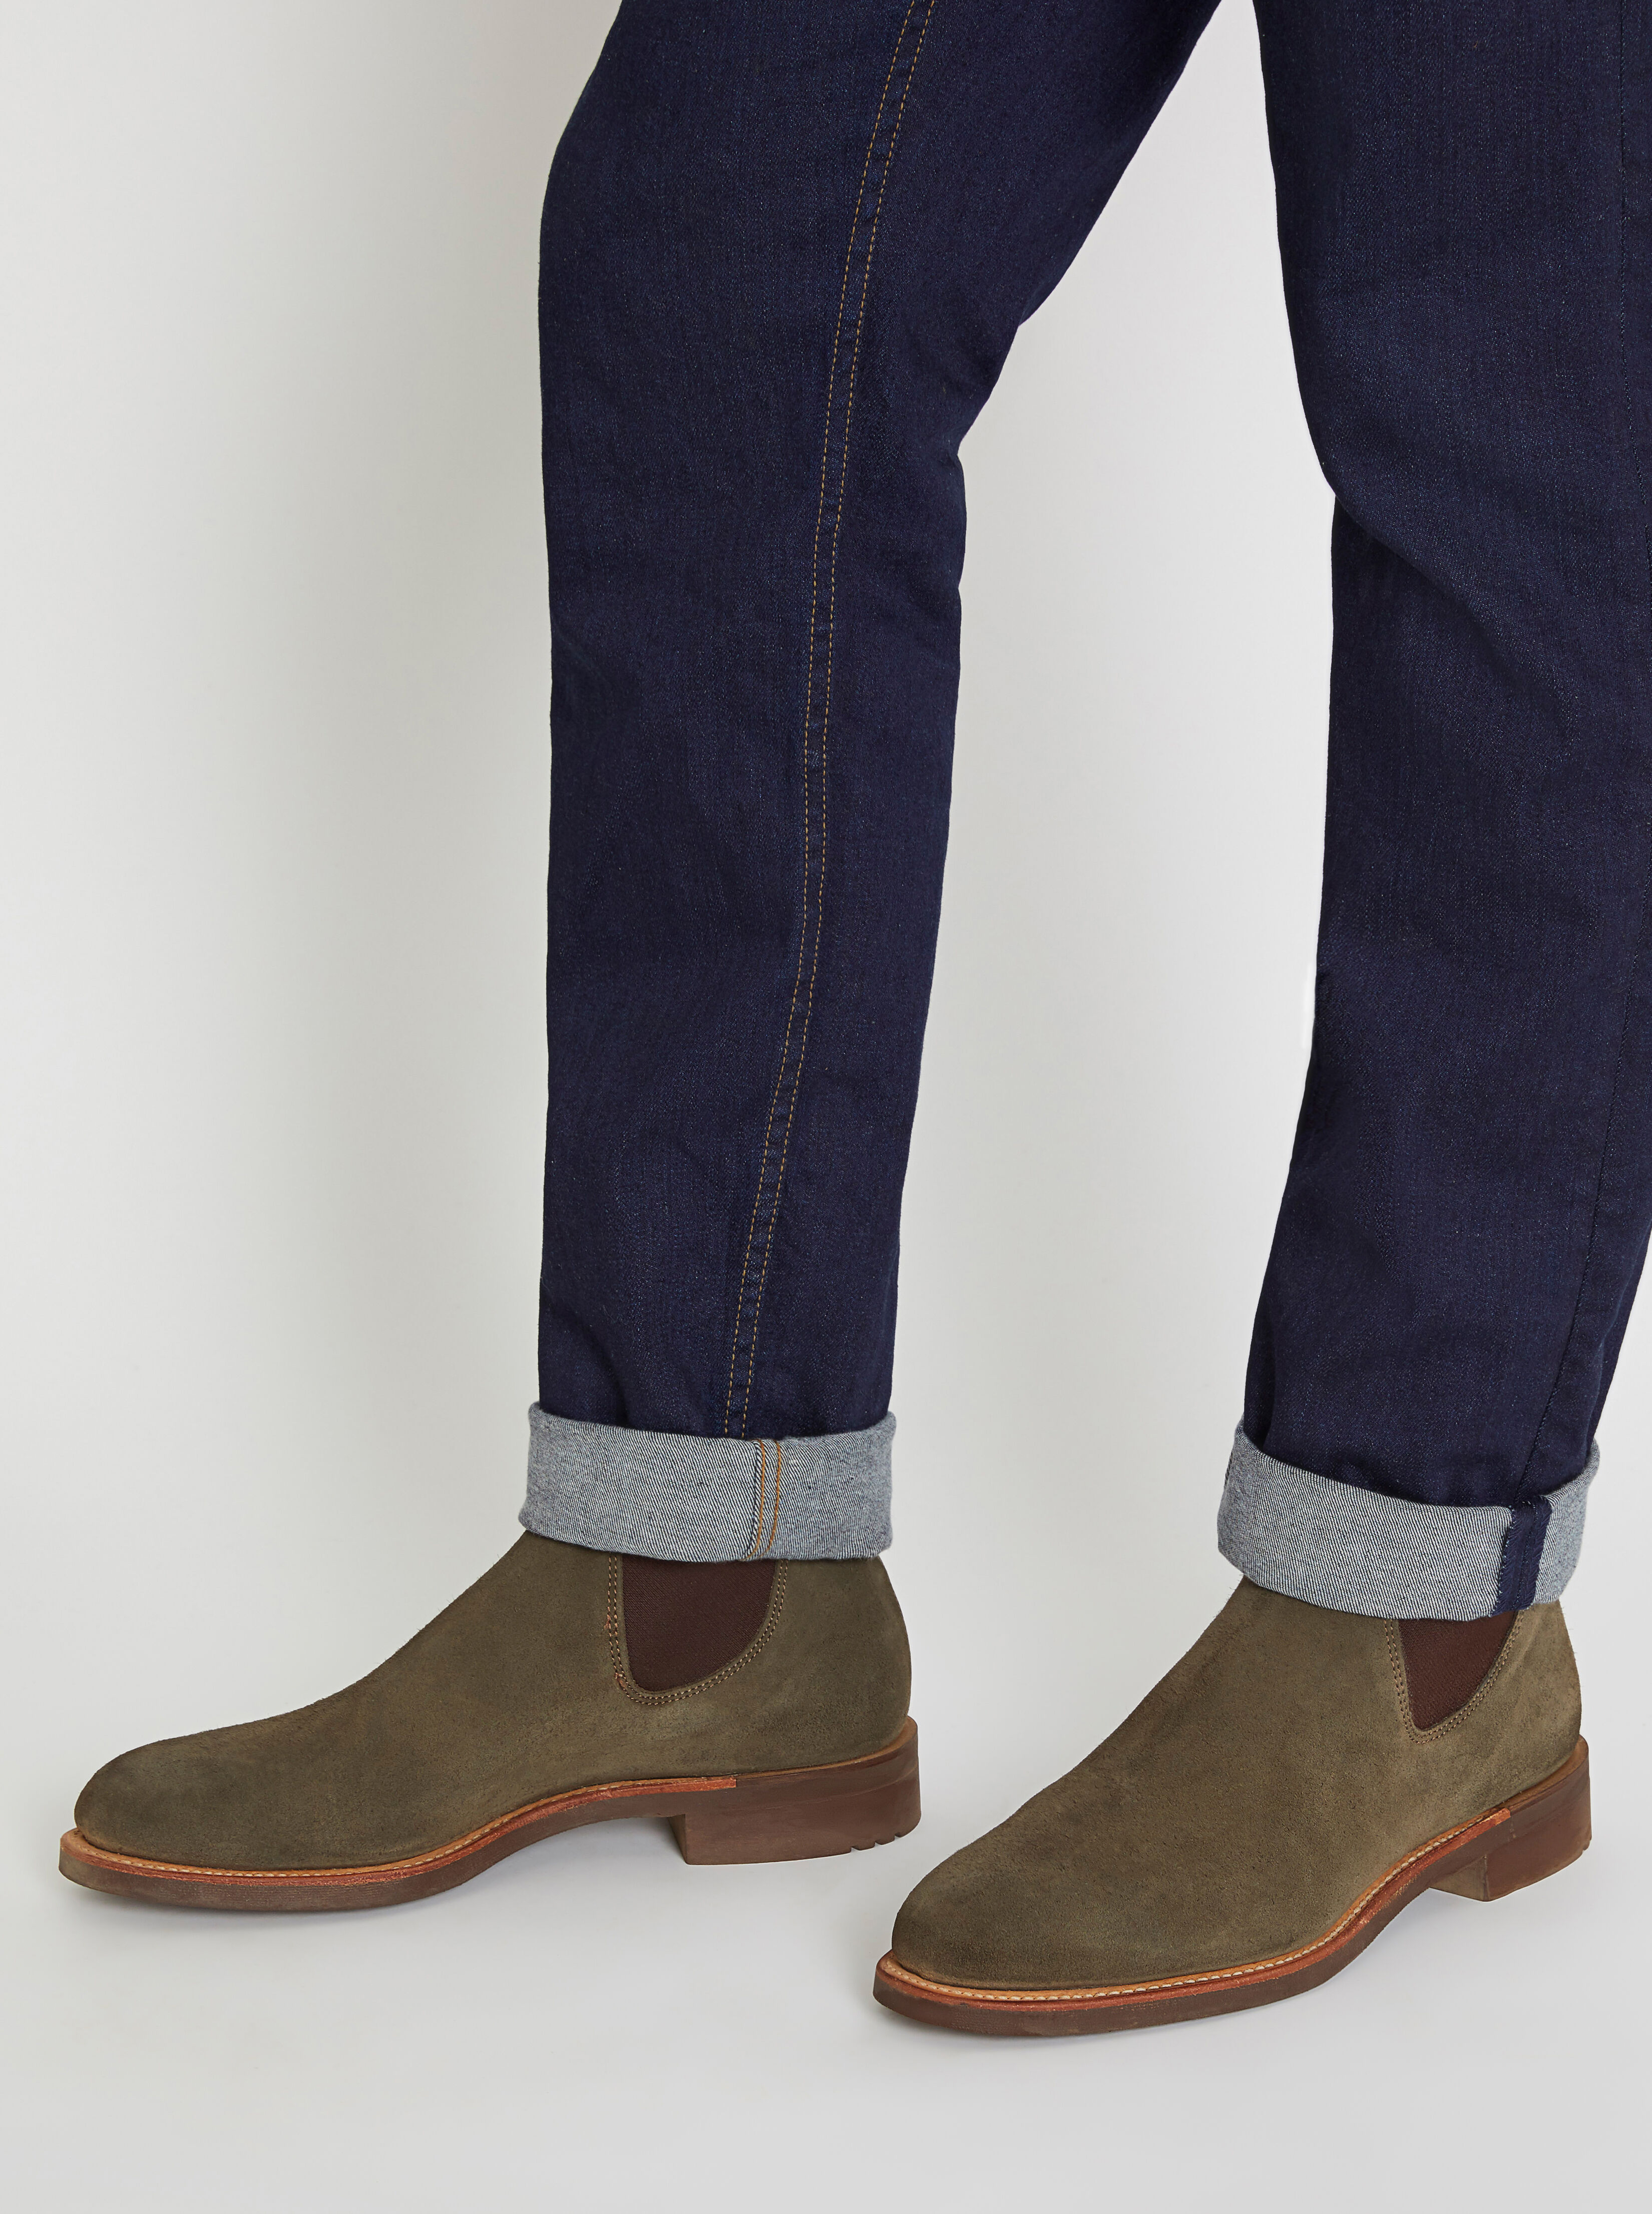 rm williams suede chelsea boots